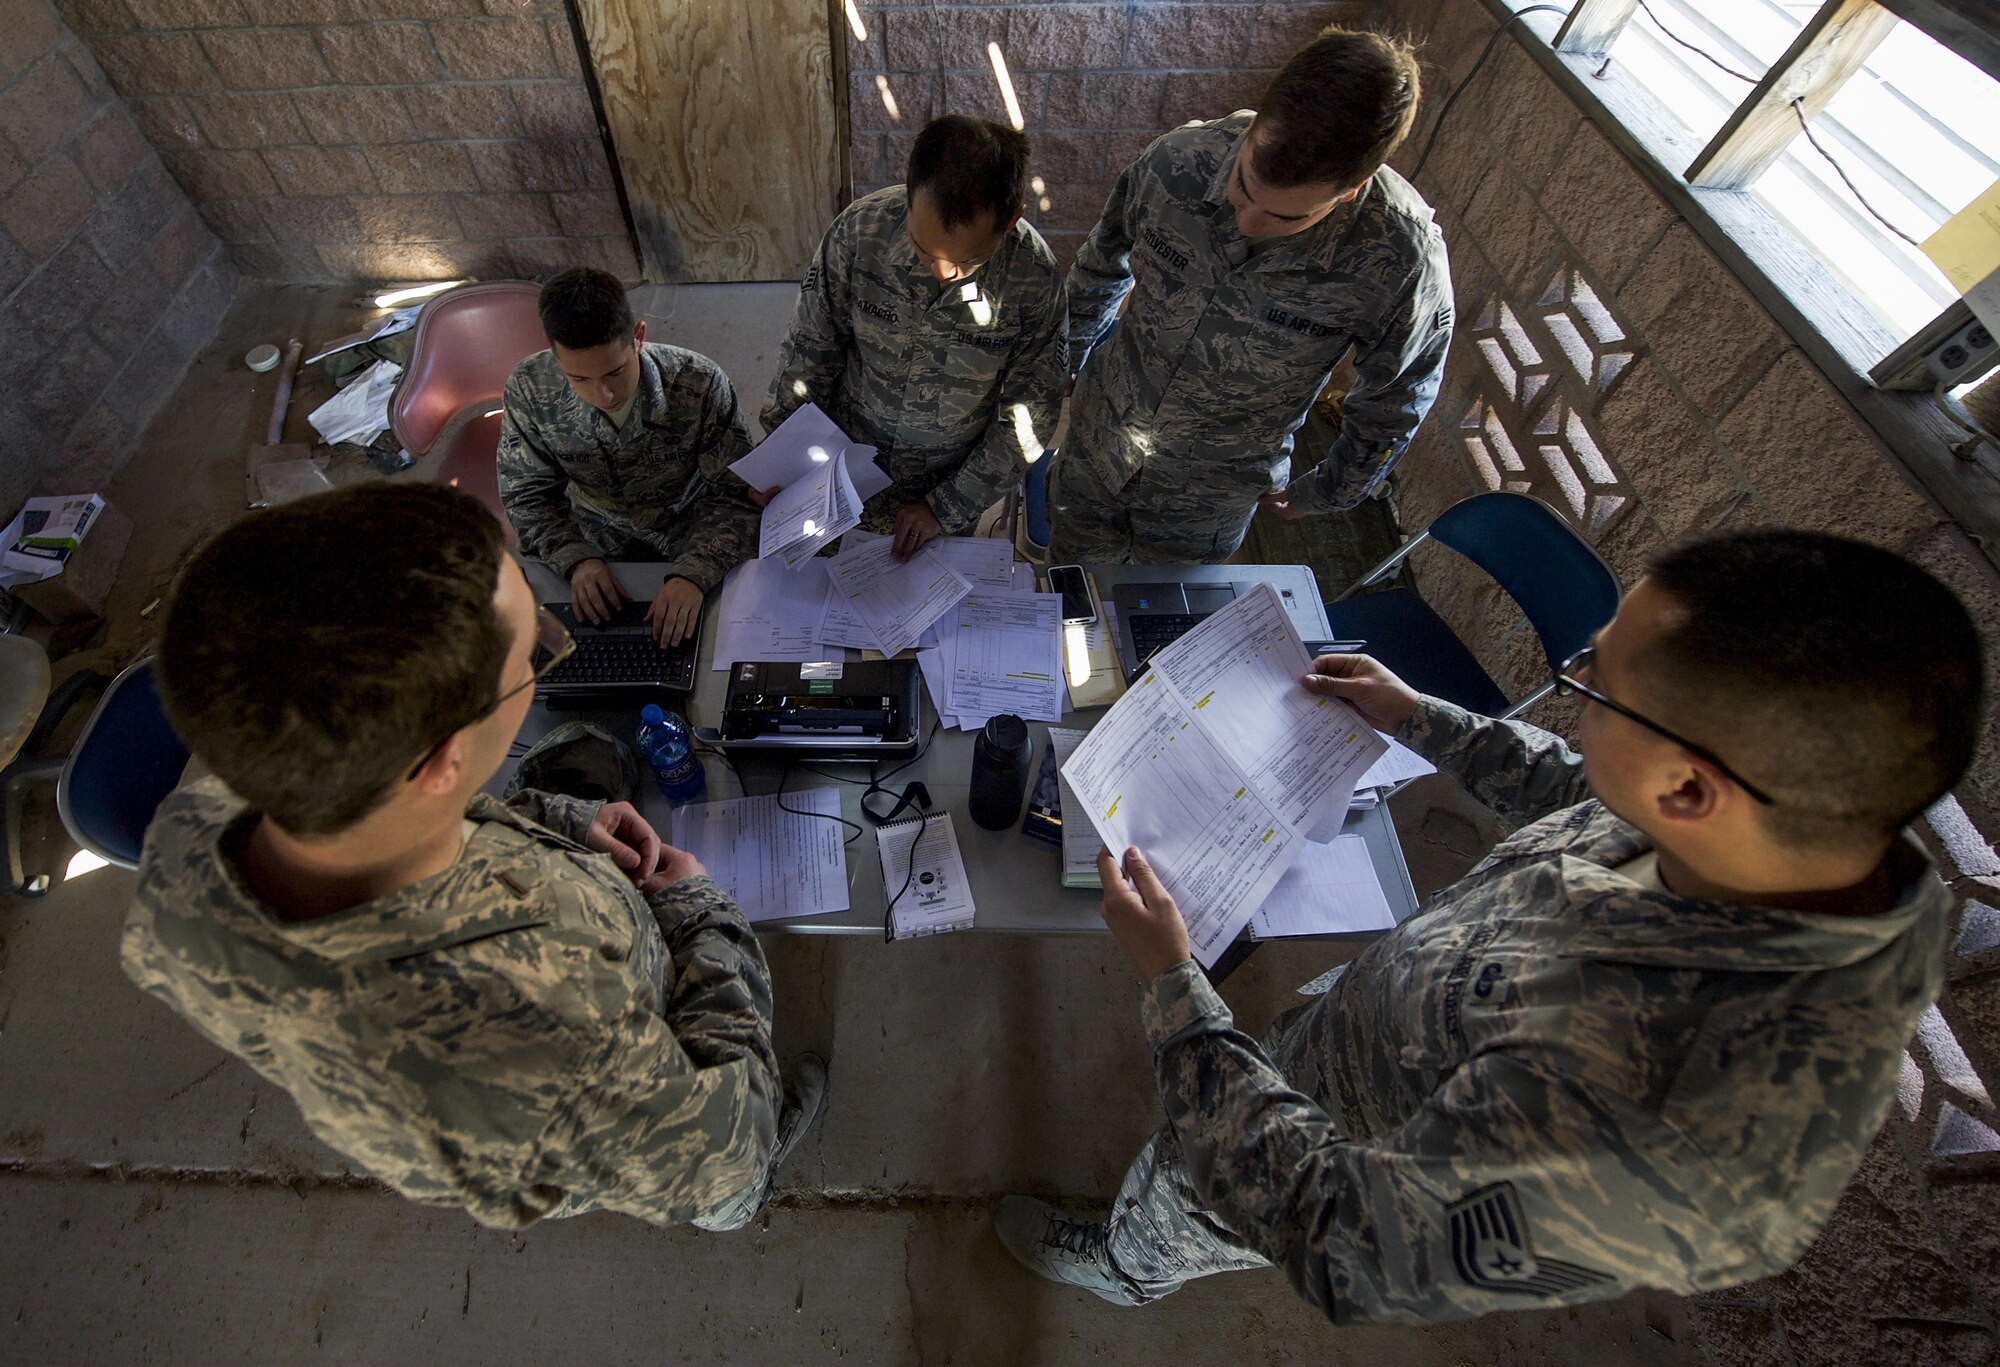 A team of U.S. Air Force contracting officers review offers after meeting with simulated vendors during a training exercise organized by the 99th Contracting Squadron on Nellis Air Force Base, Nev., March 16, 2017. The exercise was spread over two days, one day for lectures and scenarios followed by one day in the field with the challenges of a bare base environment. (U.S. Air Force photo by Airman 1st Class Kevin Tanenbaum/Released)